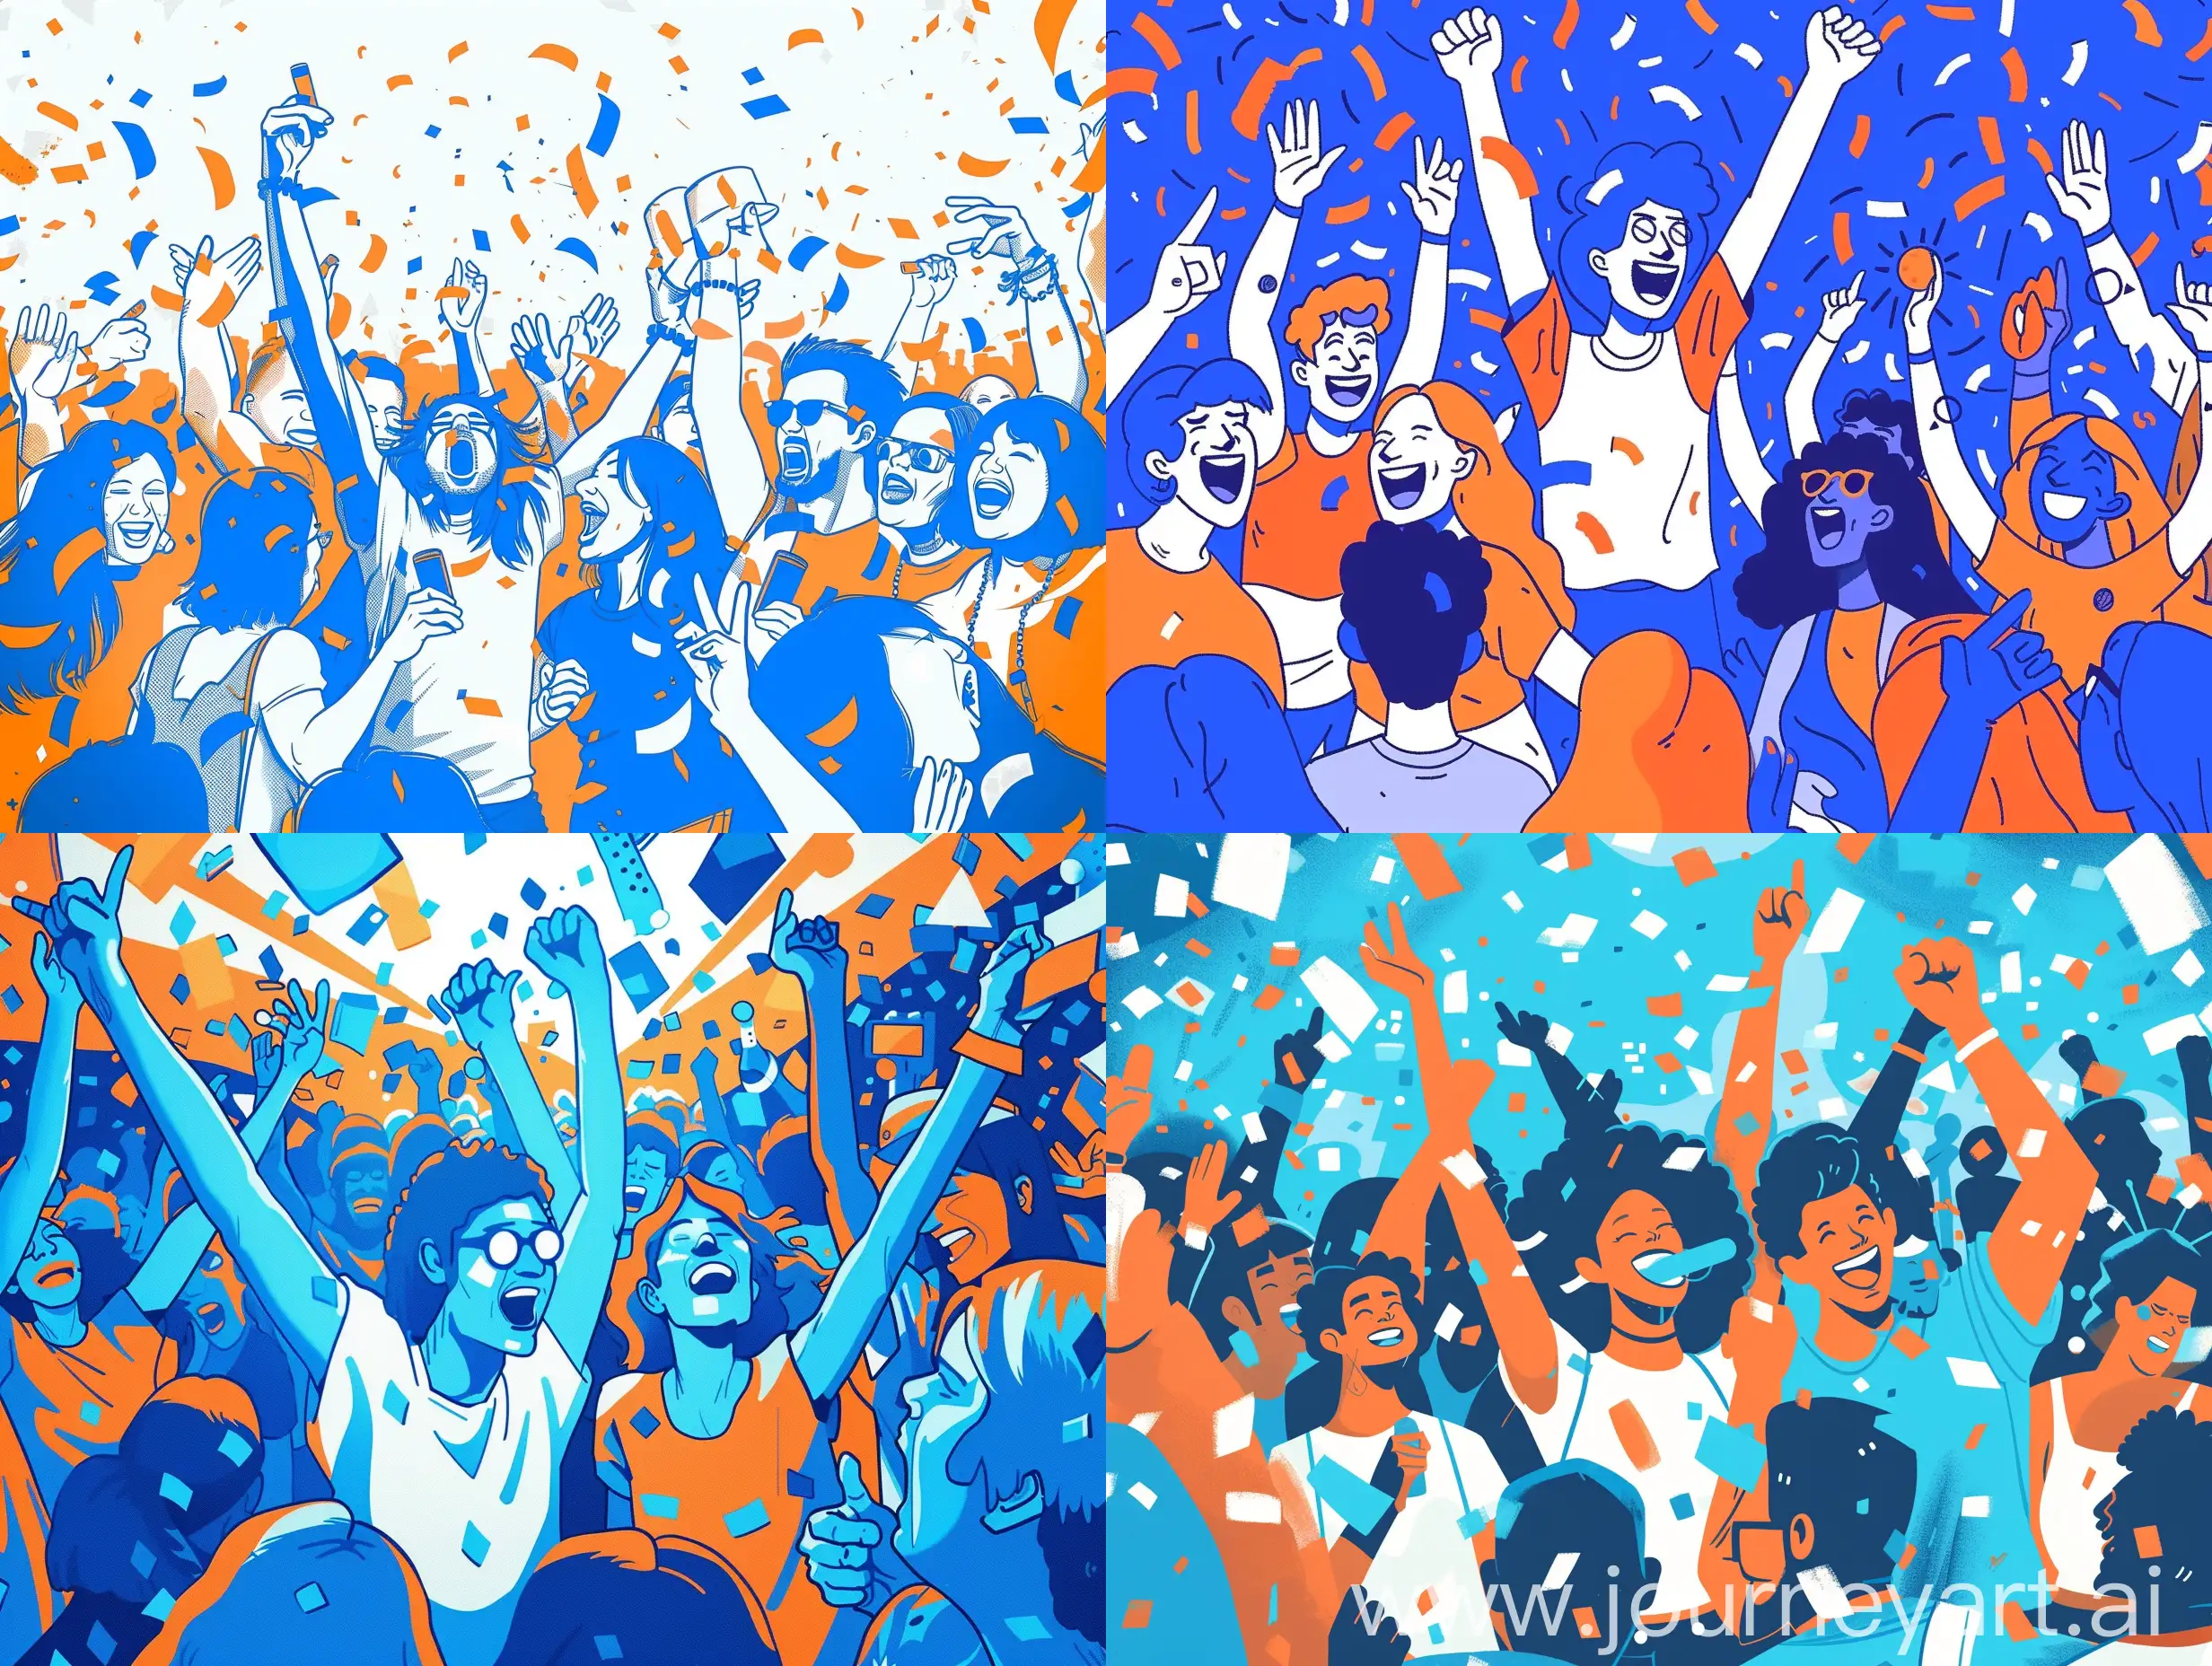 a rave party in cartoon style with blue and orange and white colors and people happy but cartoon style